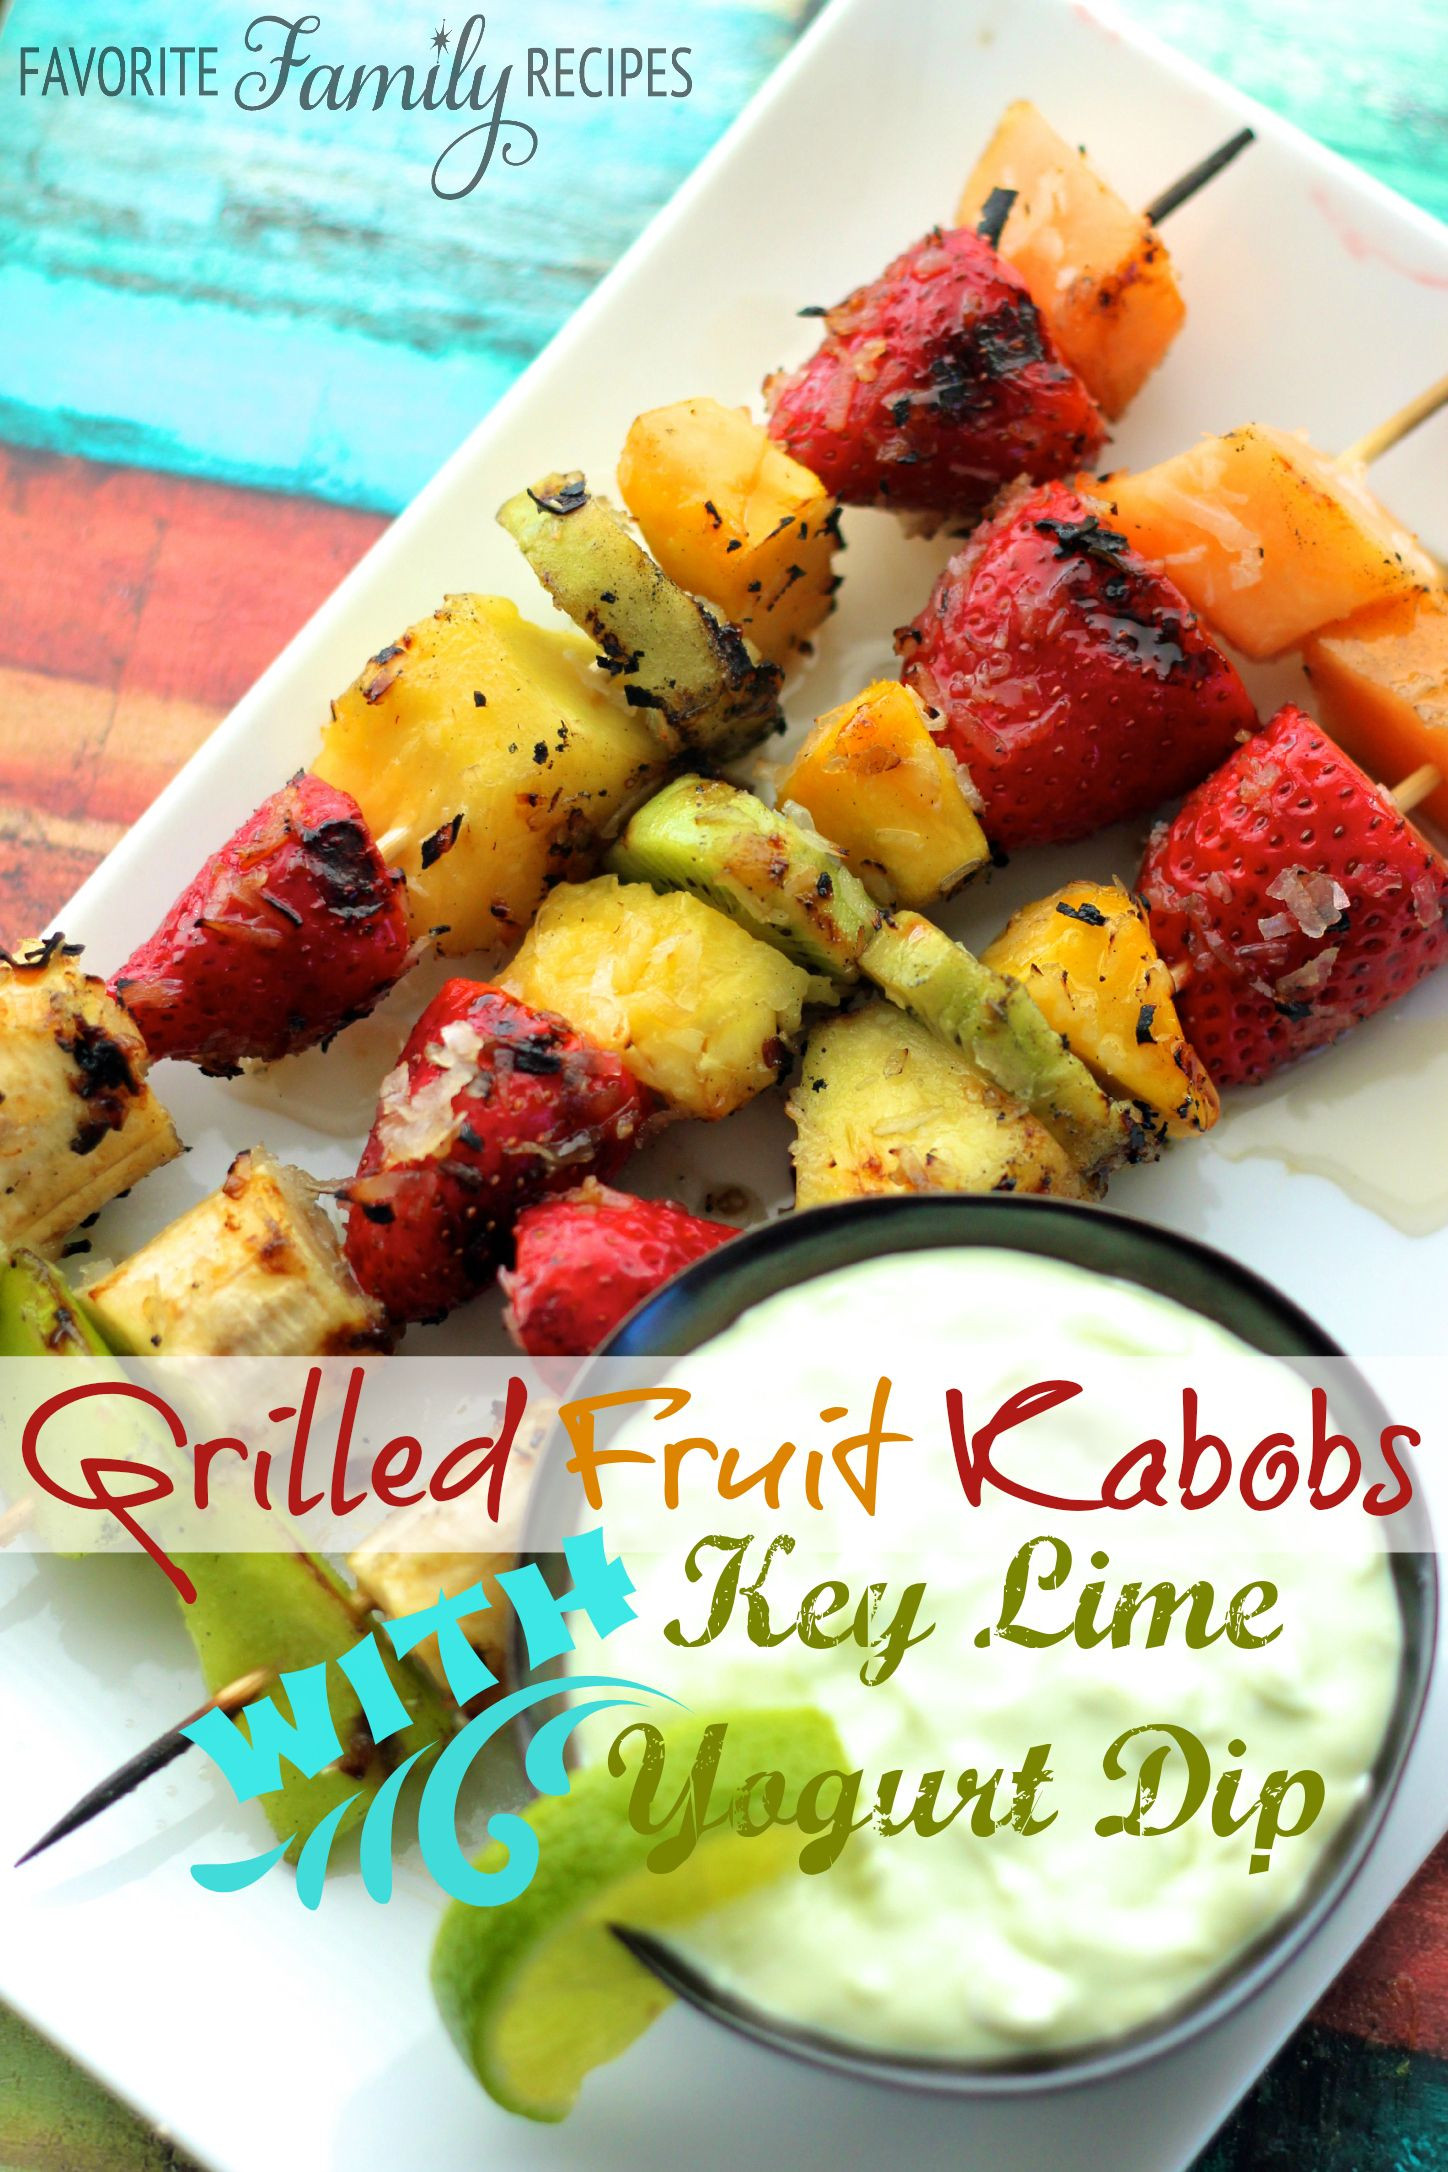 Grilled Fruit Desserts
 7 Fruits You Can Grill this Summer